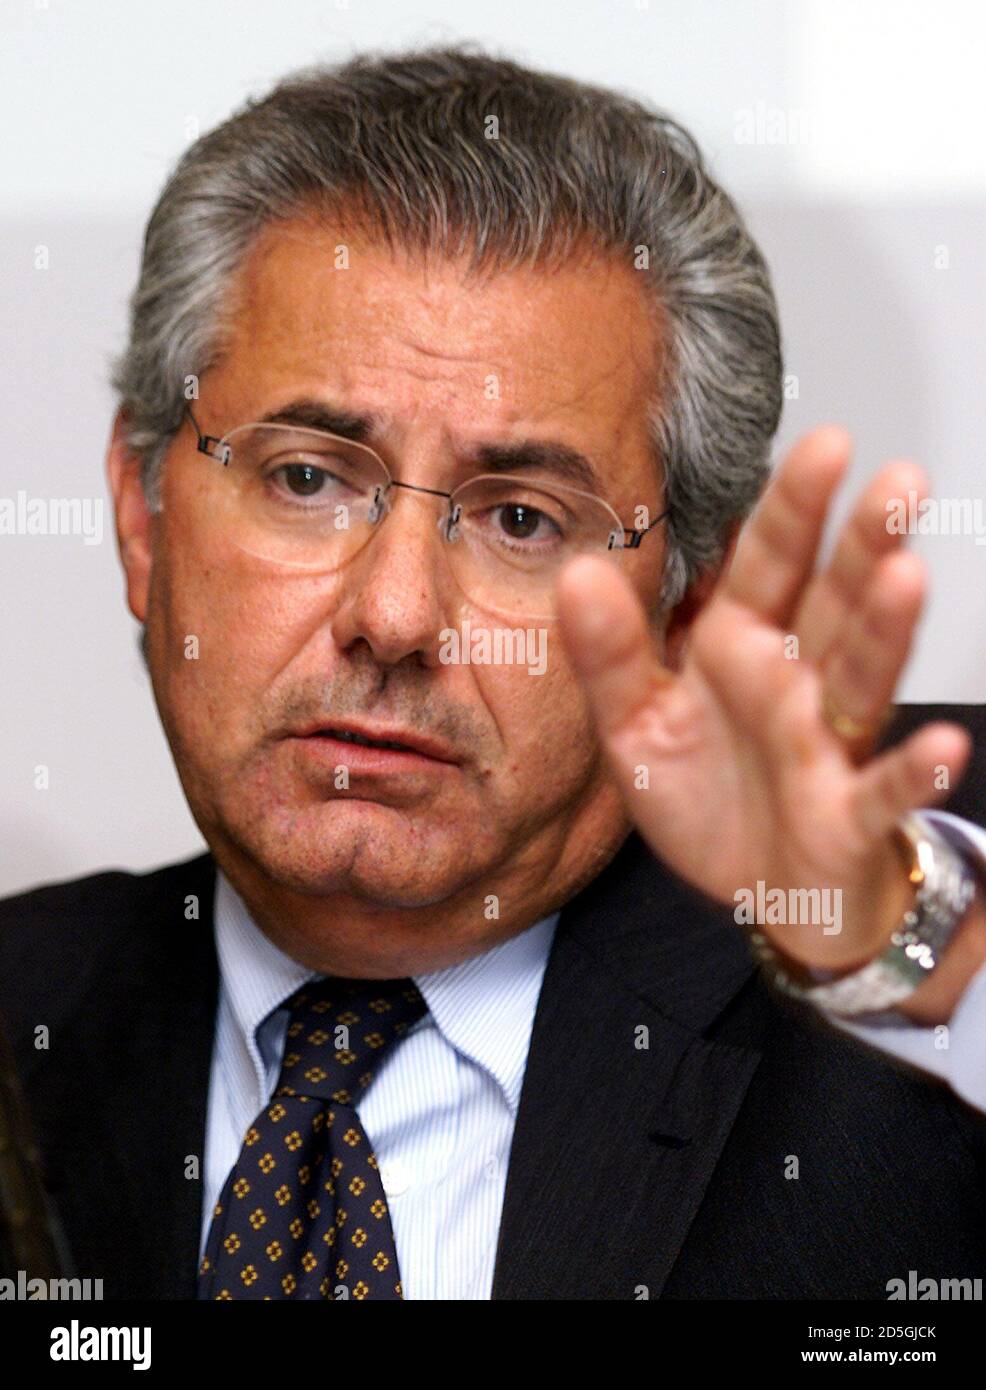 New Telecom Italia boss Roberto Colaninno gestures during a news conference  in Rome September 2. Colaninno said the 13,000 job losses the company  planned in coming years included those going into retirement.